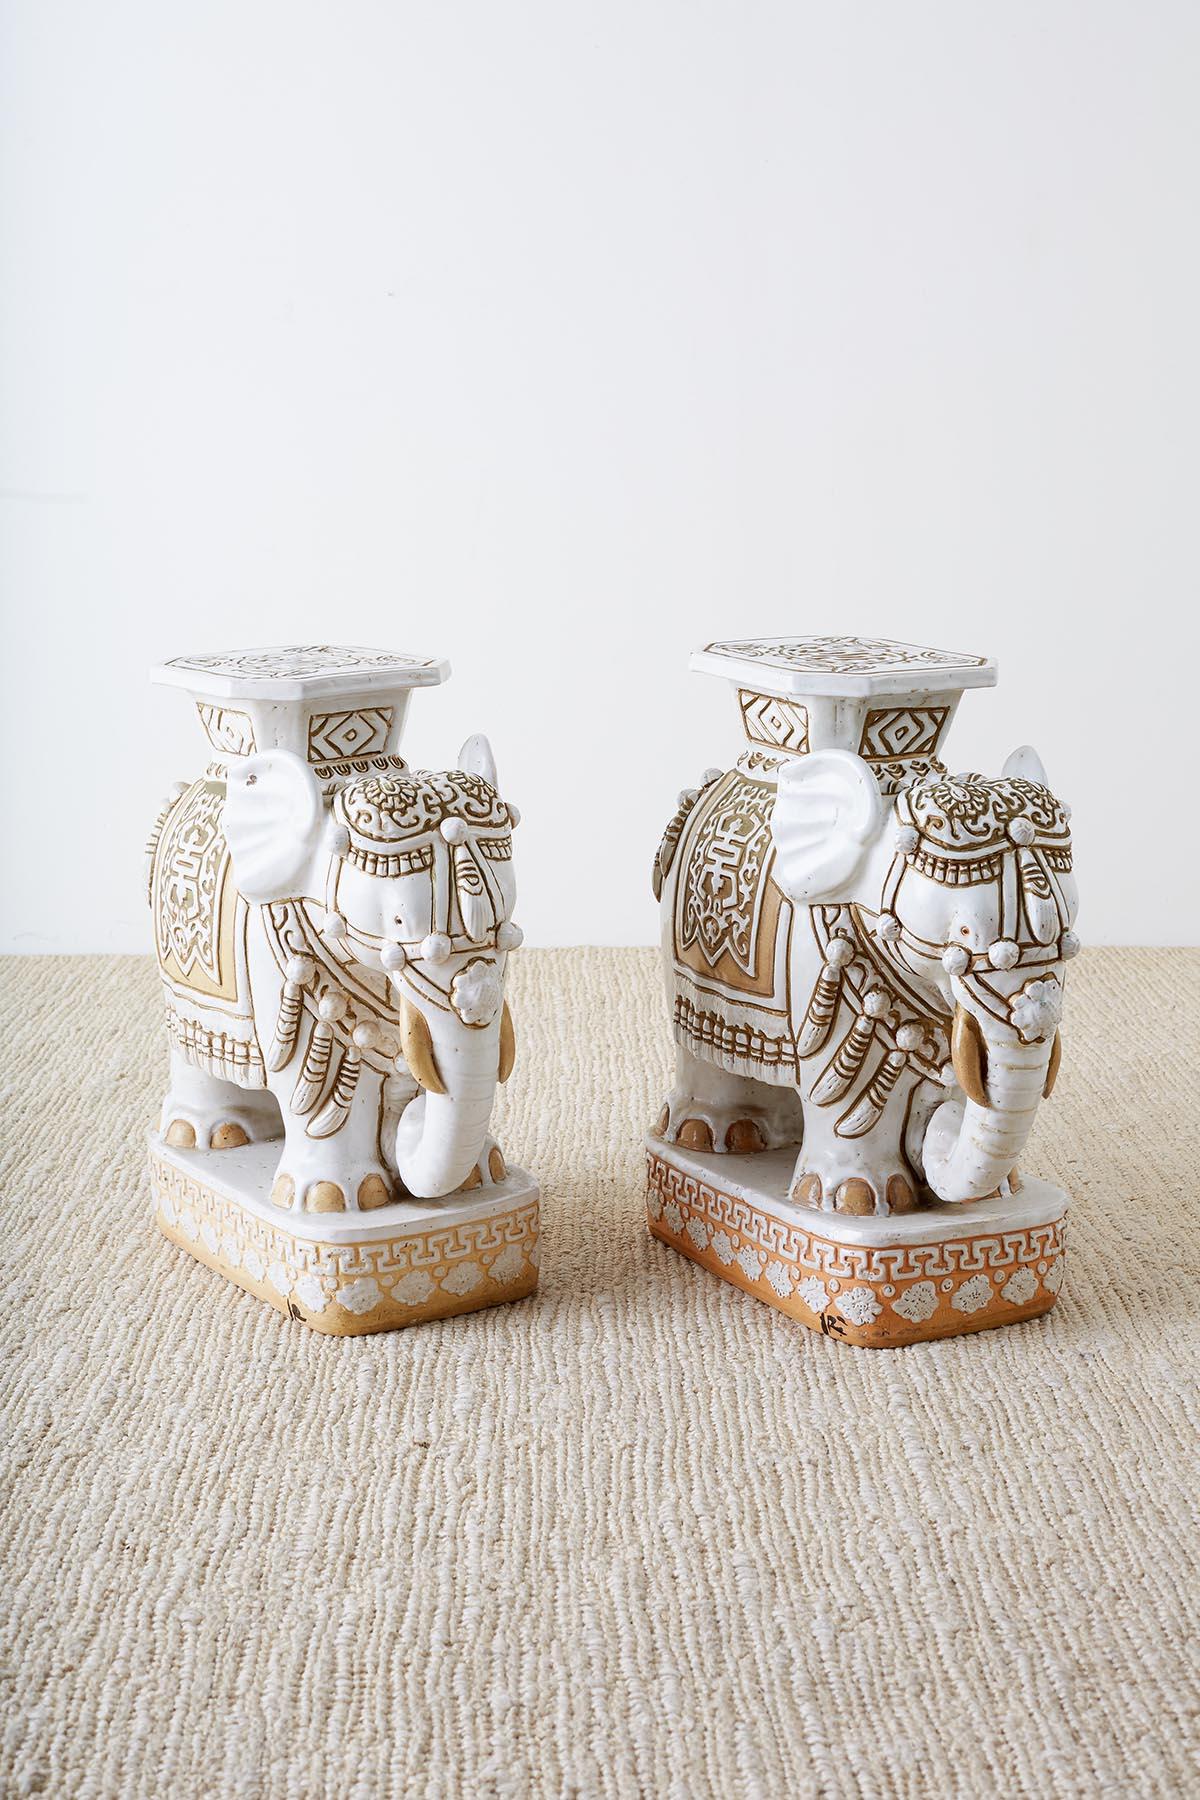 Pair of Chinese Elephant Garden Stools or Drink Tables (Keramik)